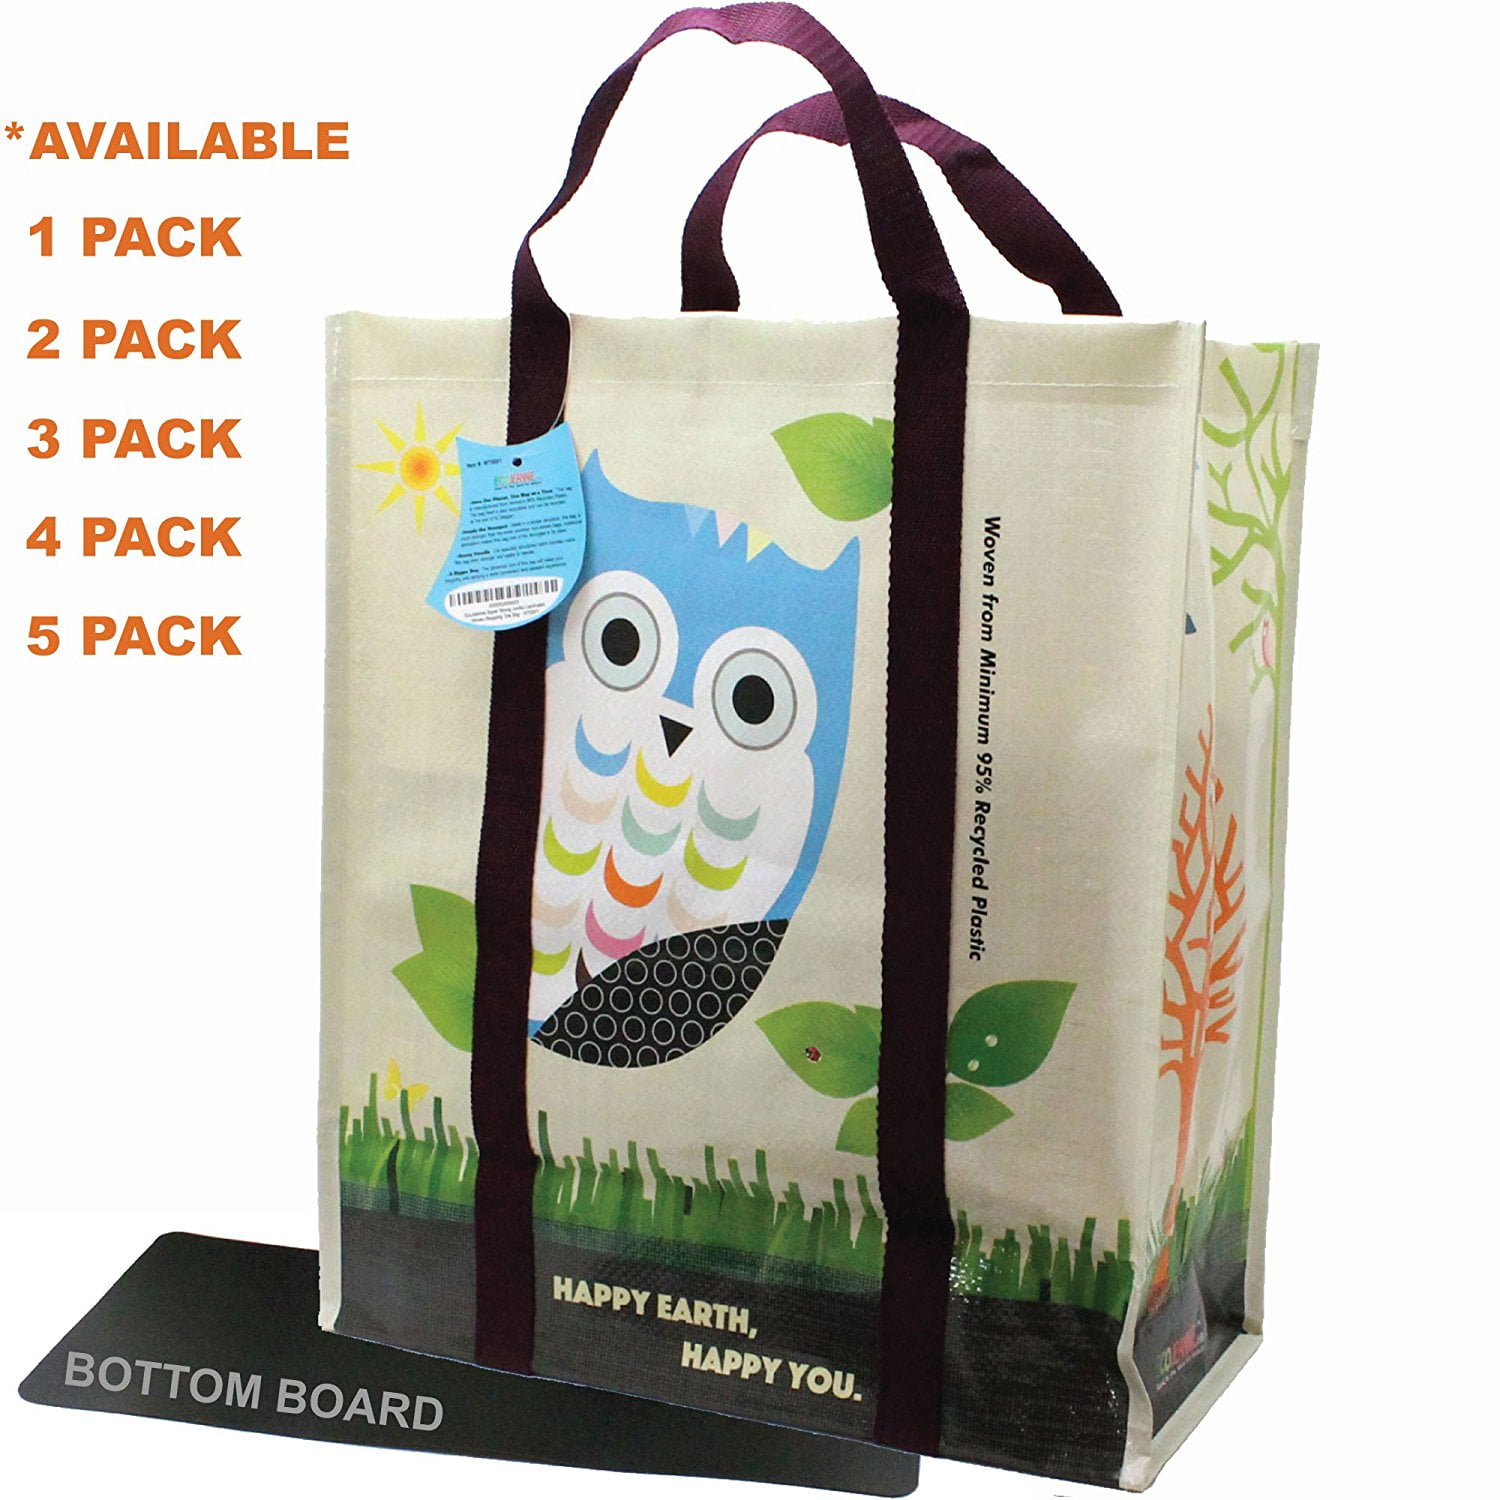 Brand New Home and Leisure Bee Happy Giant Reusable Shopping Bag 